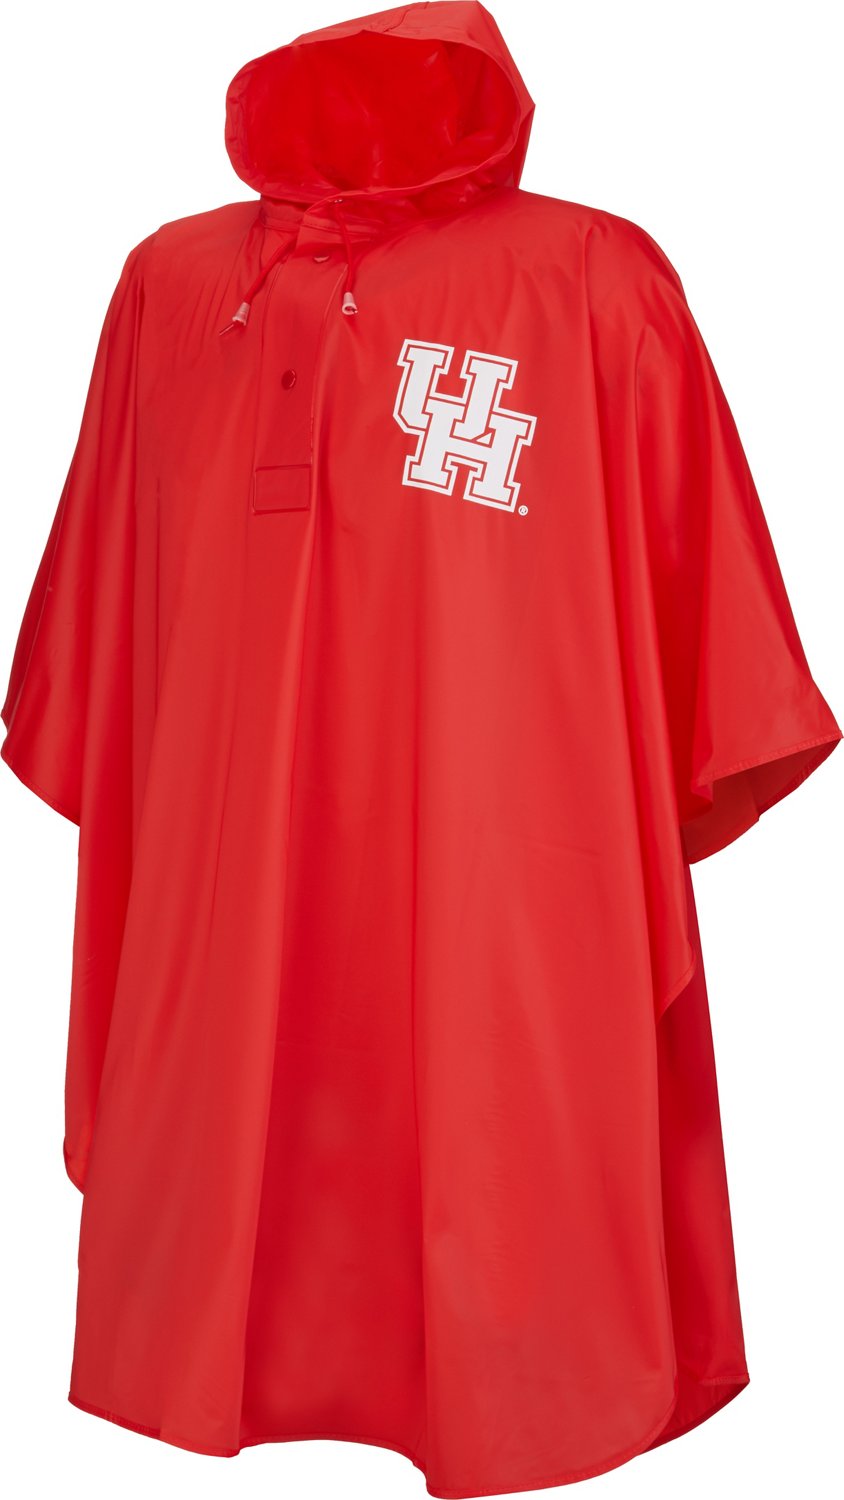 Houston Cougars | Houston Cougars Fan Gear & Clothes | Academy